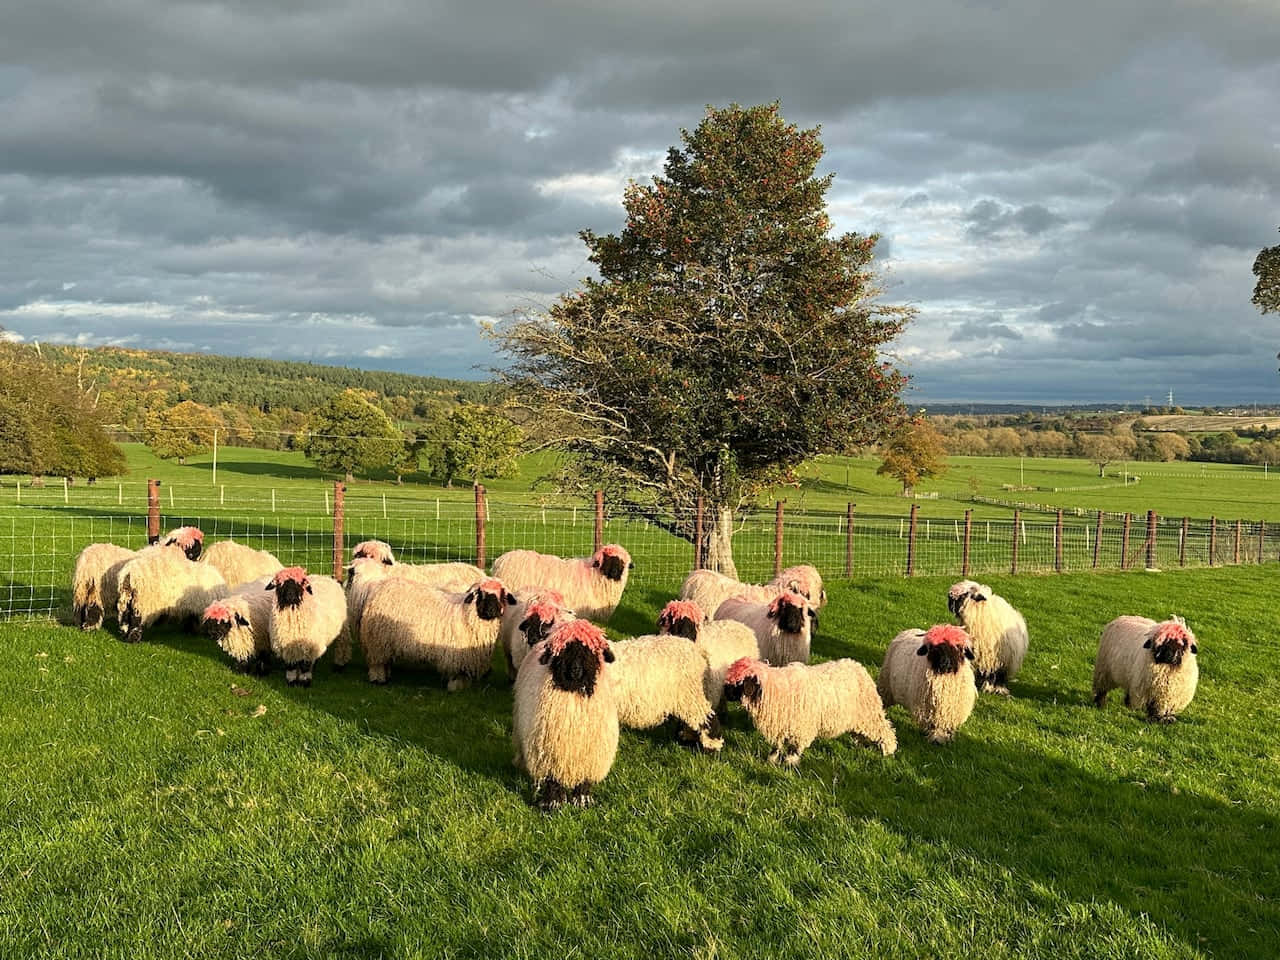 Image  Curious Sheep Frolics in Open Field